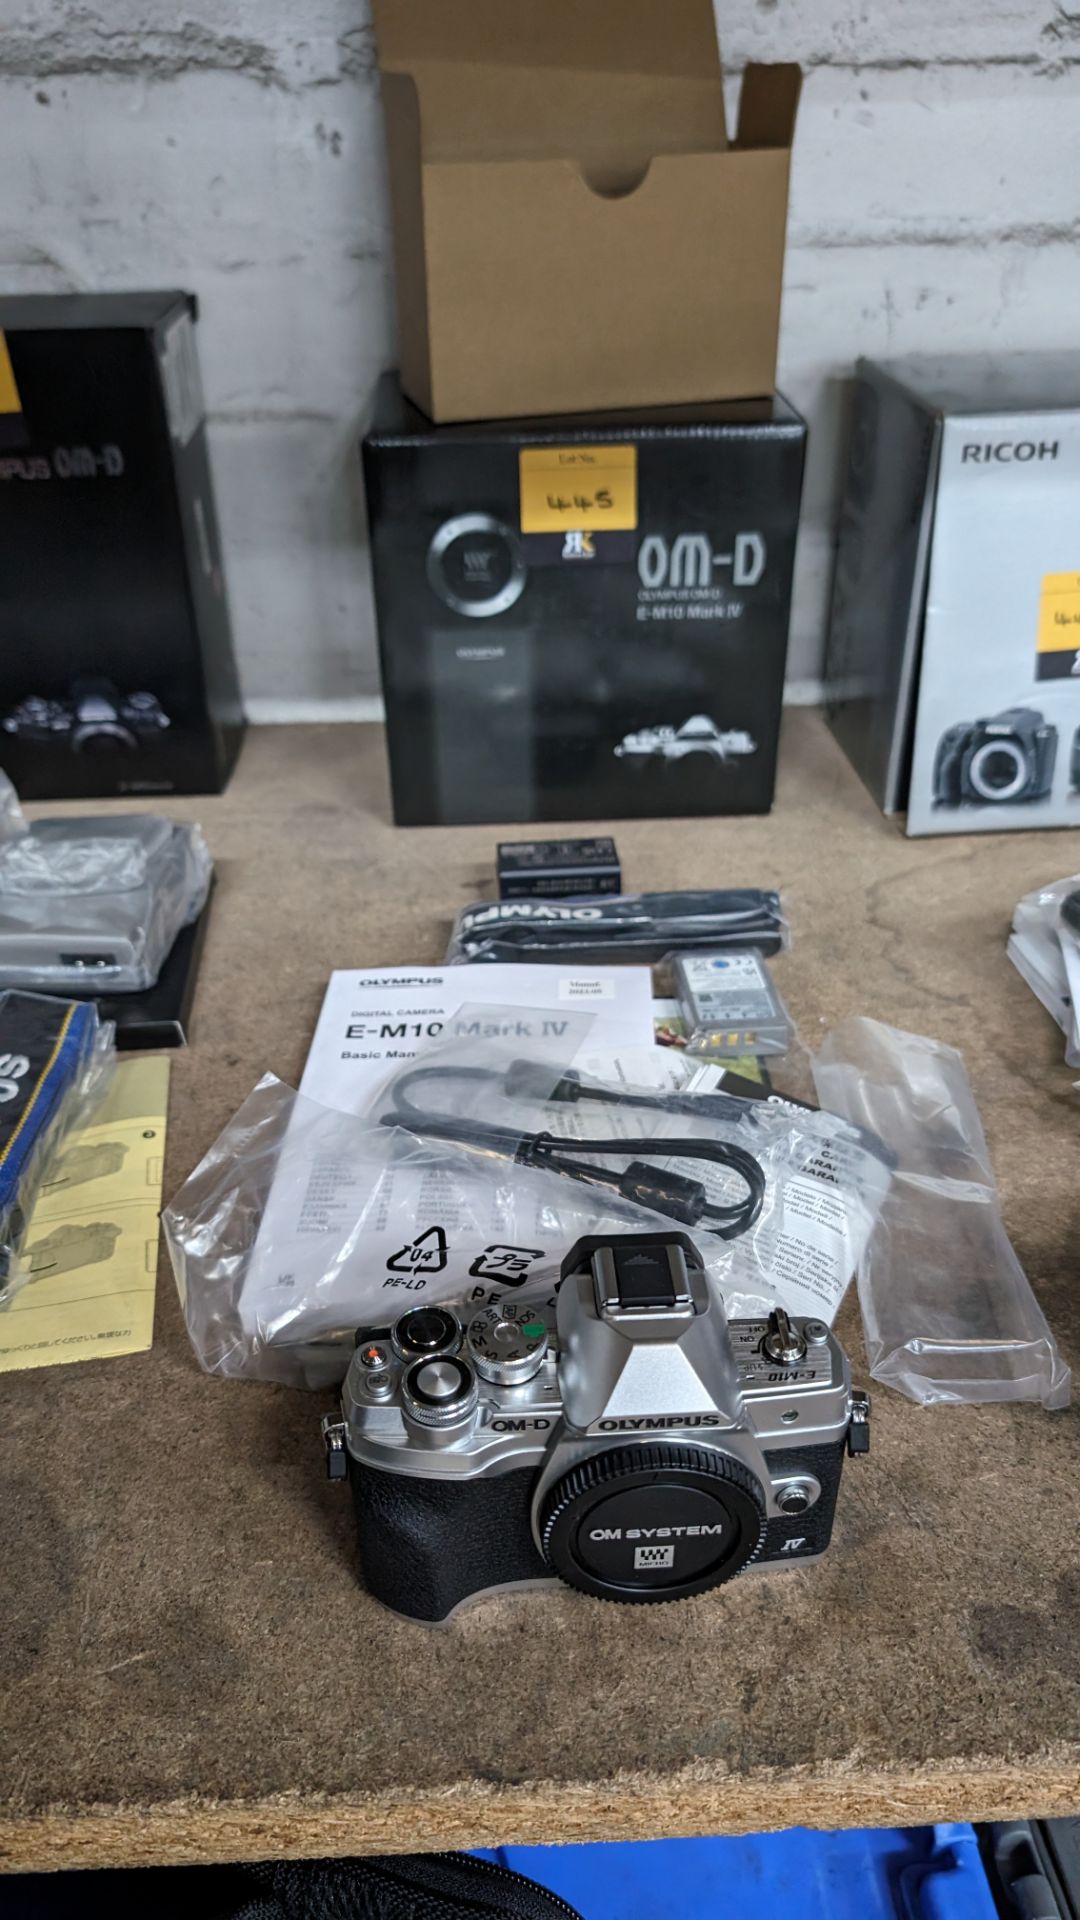 Olympus OM-D E-M10 Mark IV camera, in box, including strap, battery, adaptor and cable - Bild 13 aus 13